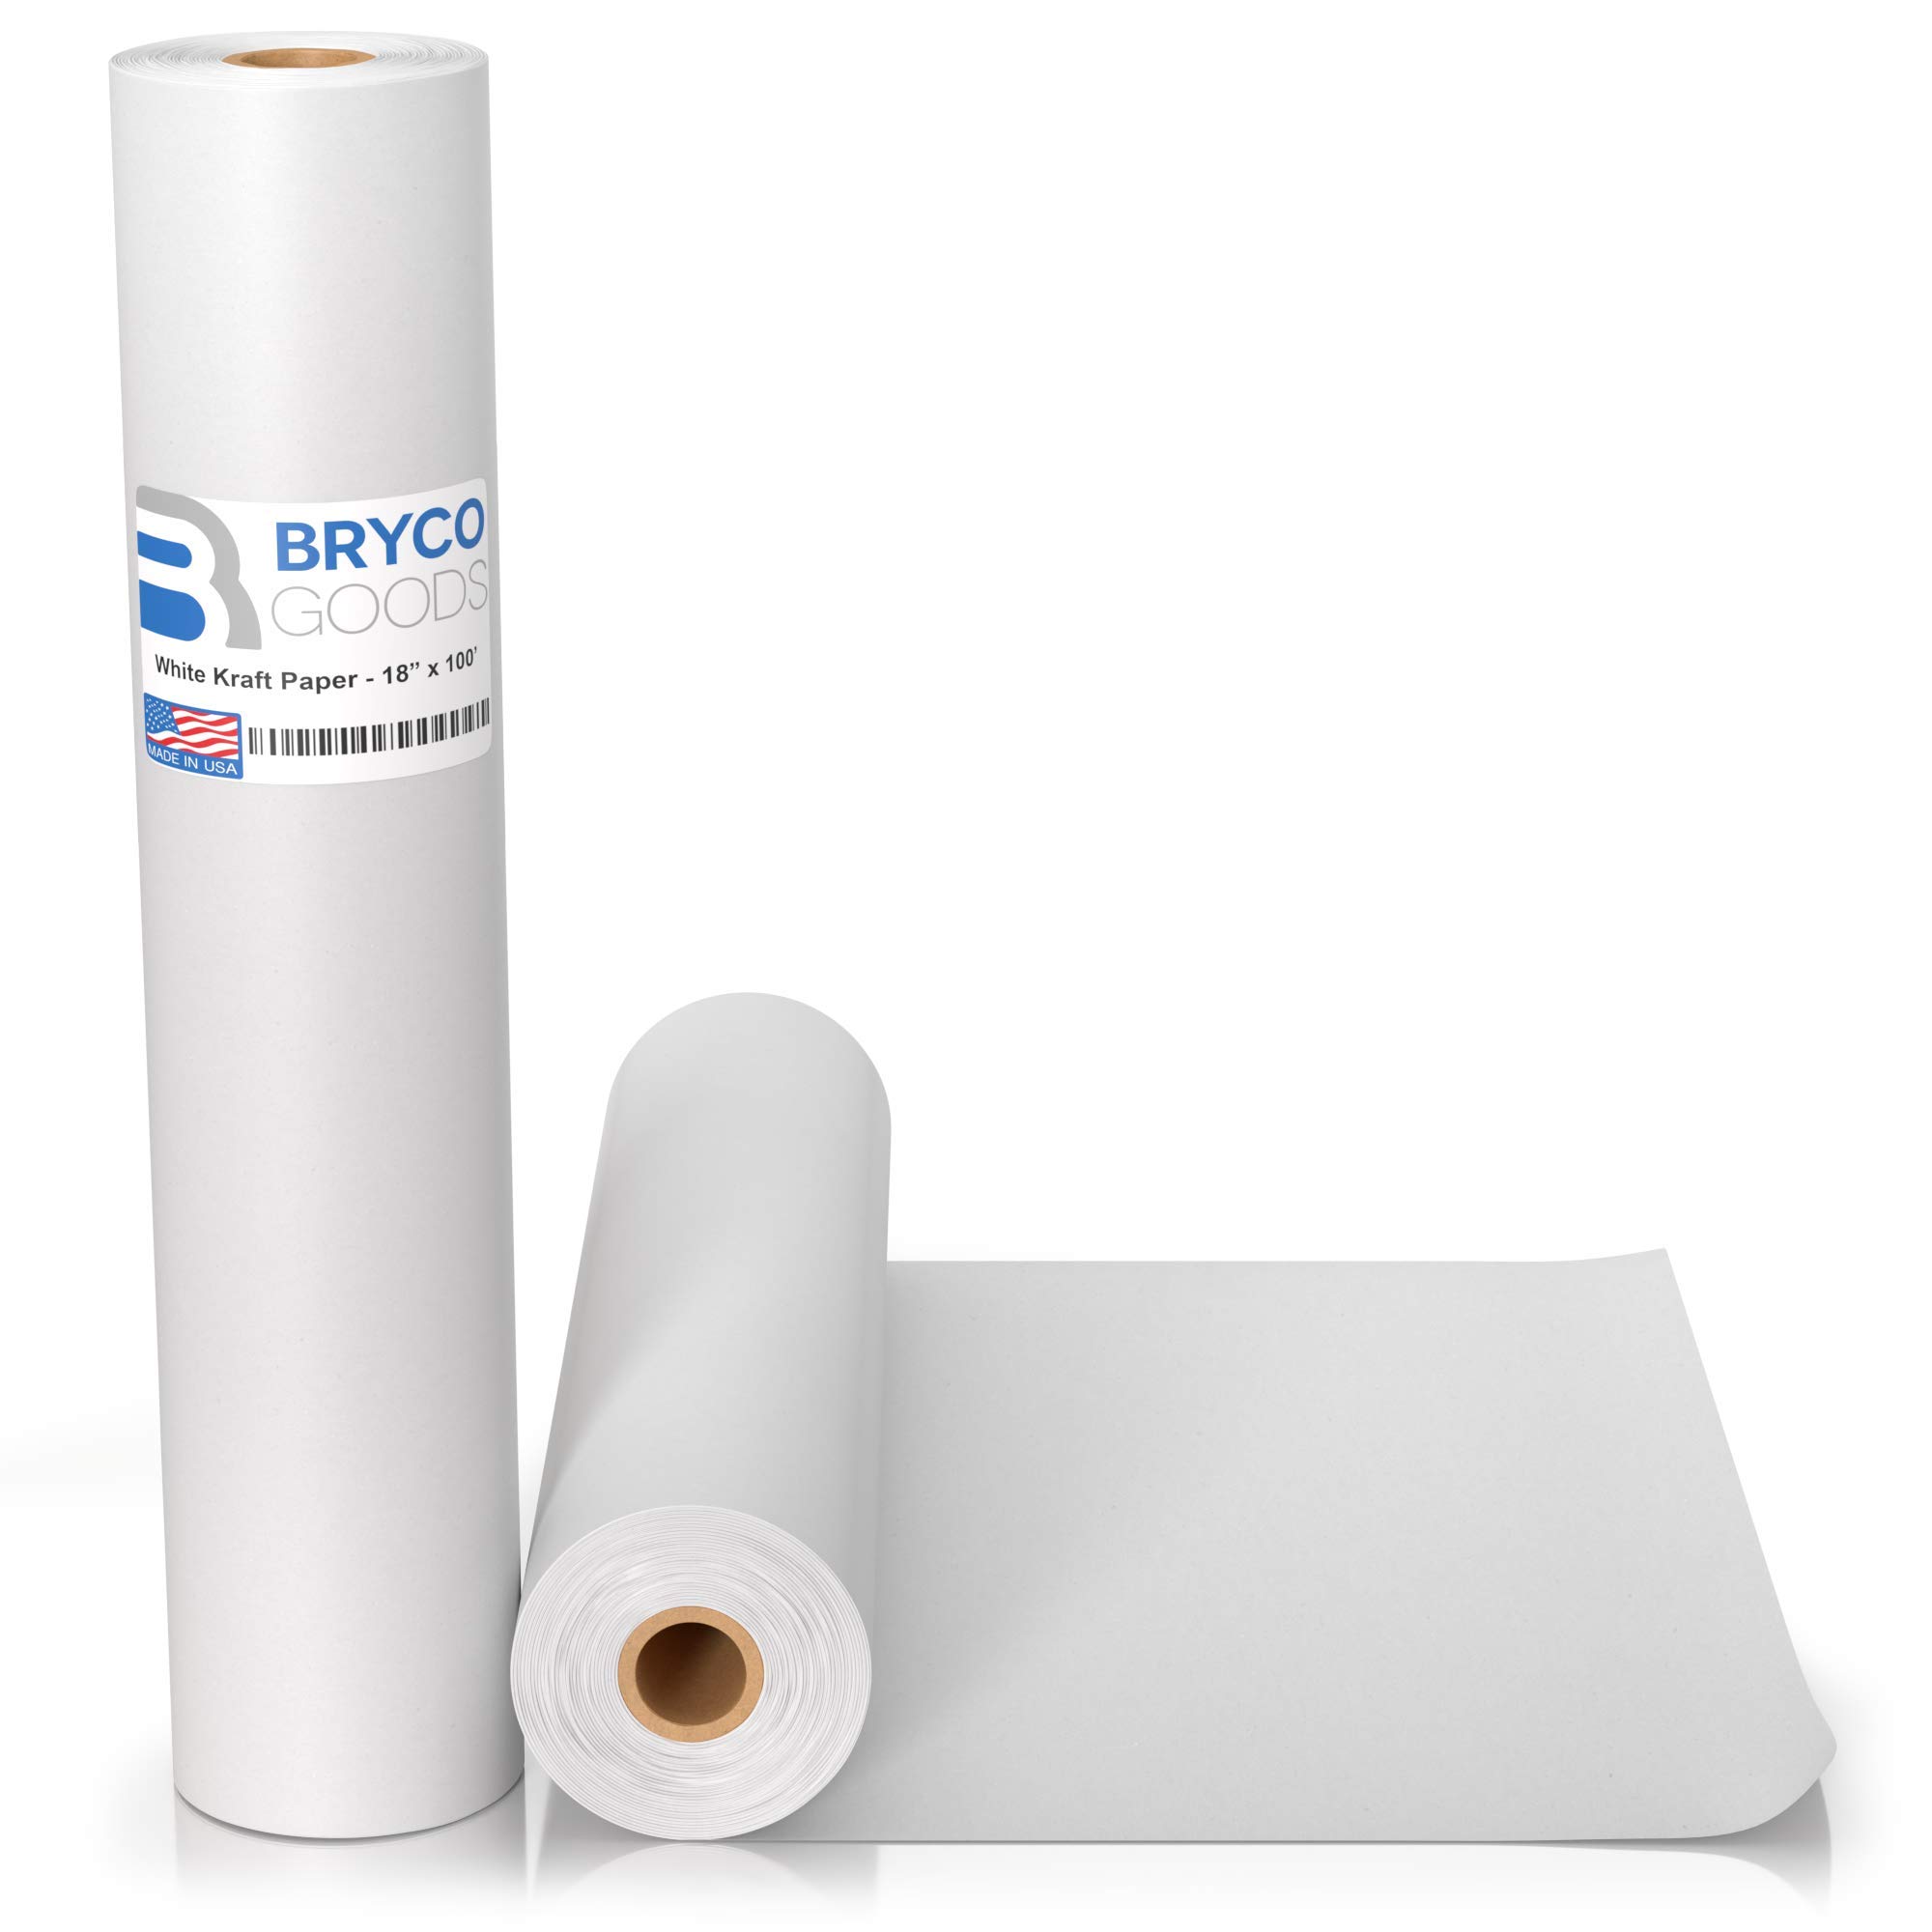 Kraft Craft Paper Roll White Packaging Material Origami Paper